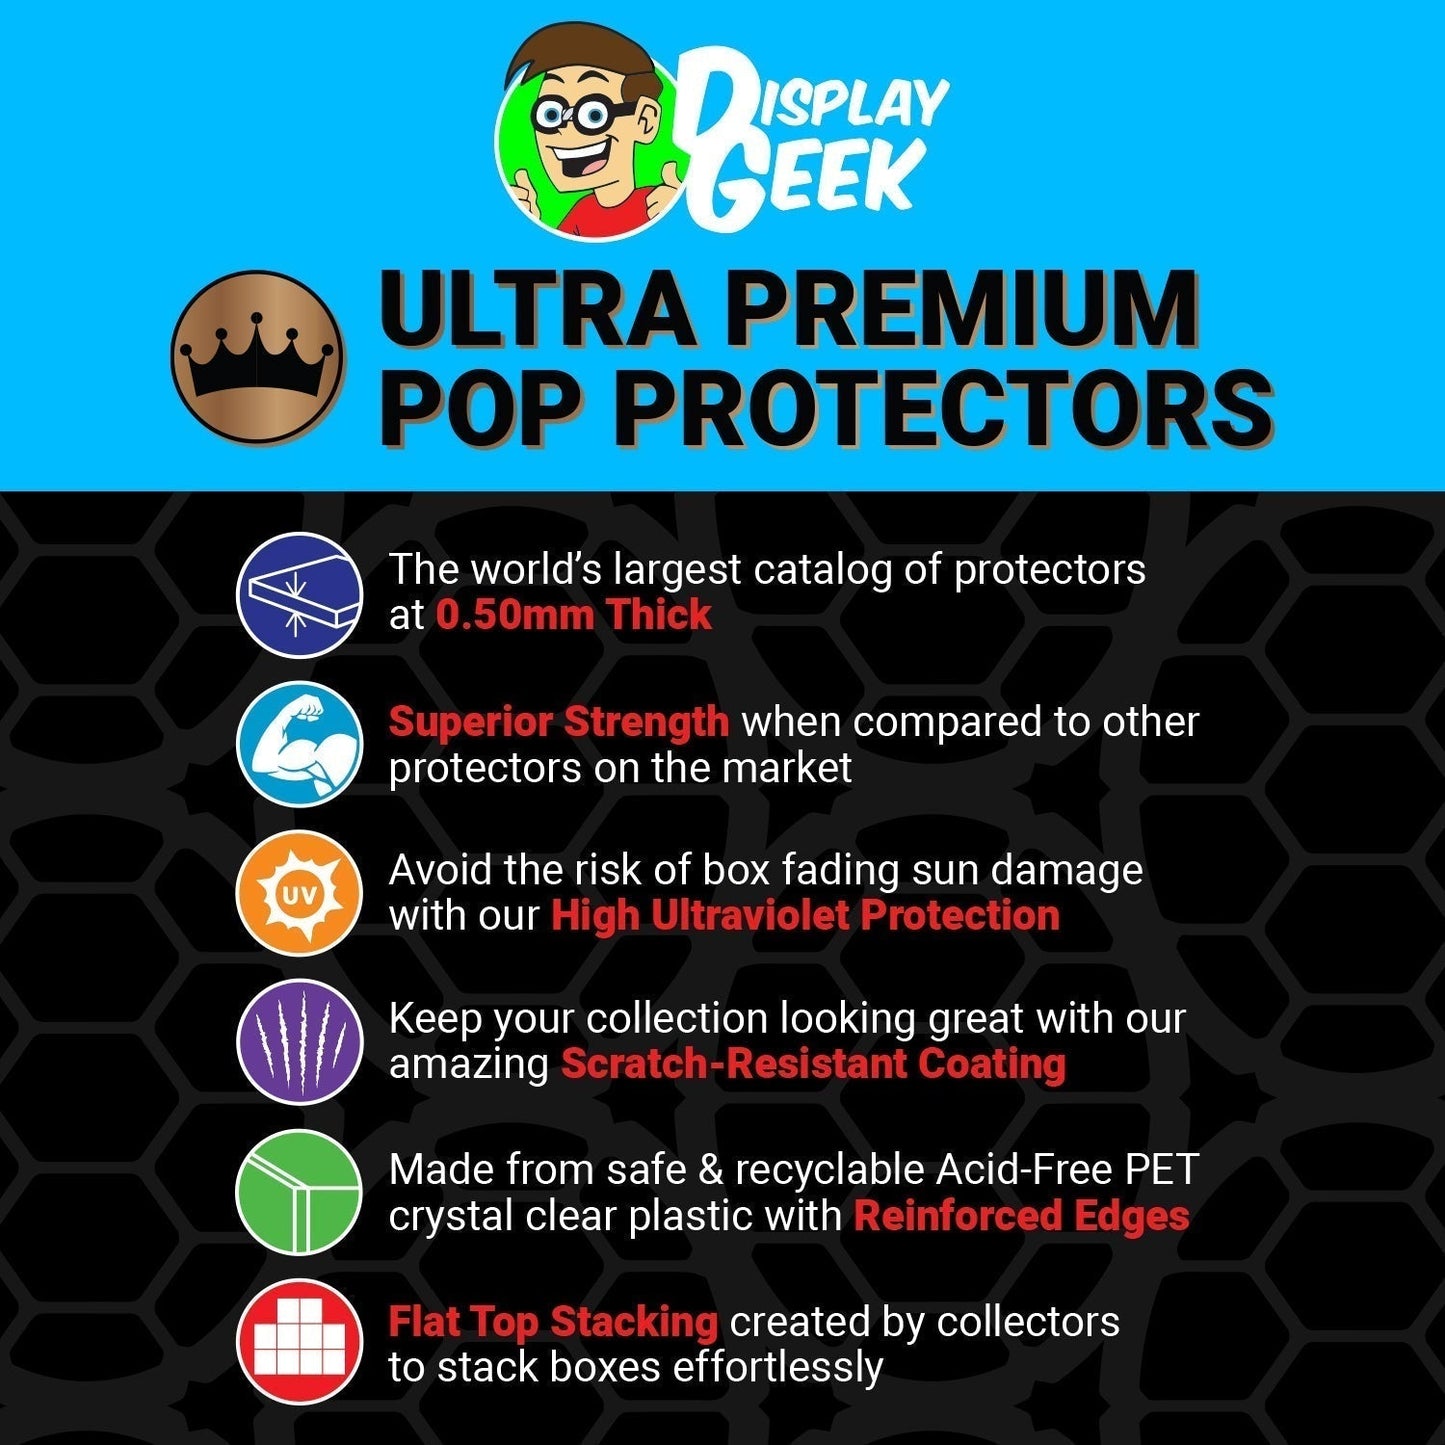 Pop Protector for Tom Brady Tampa Bay Buccaneers #11 Funko Trading Cards - PPG Pop Protector Guide Search Created by Display Geek